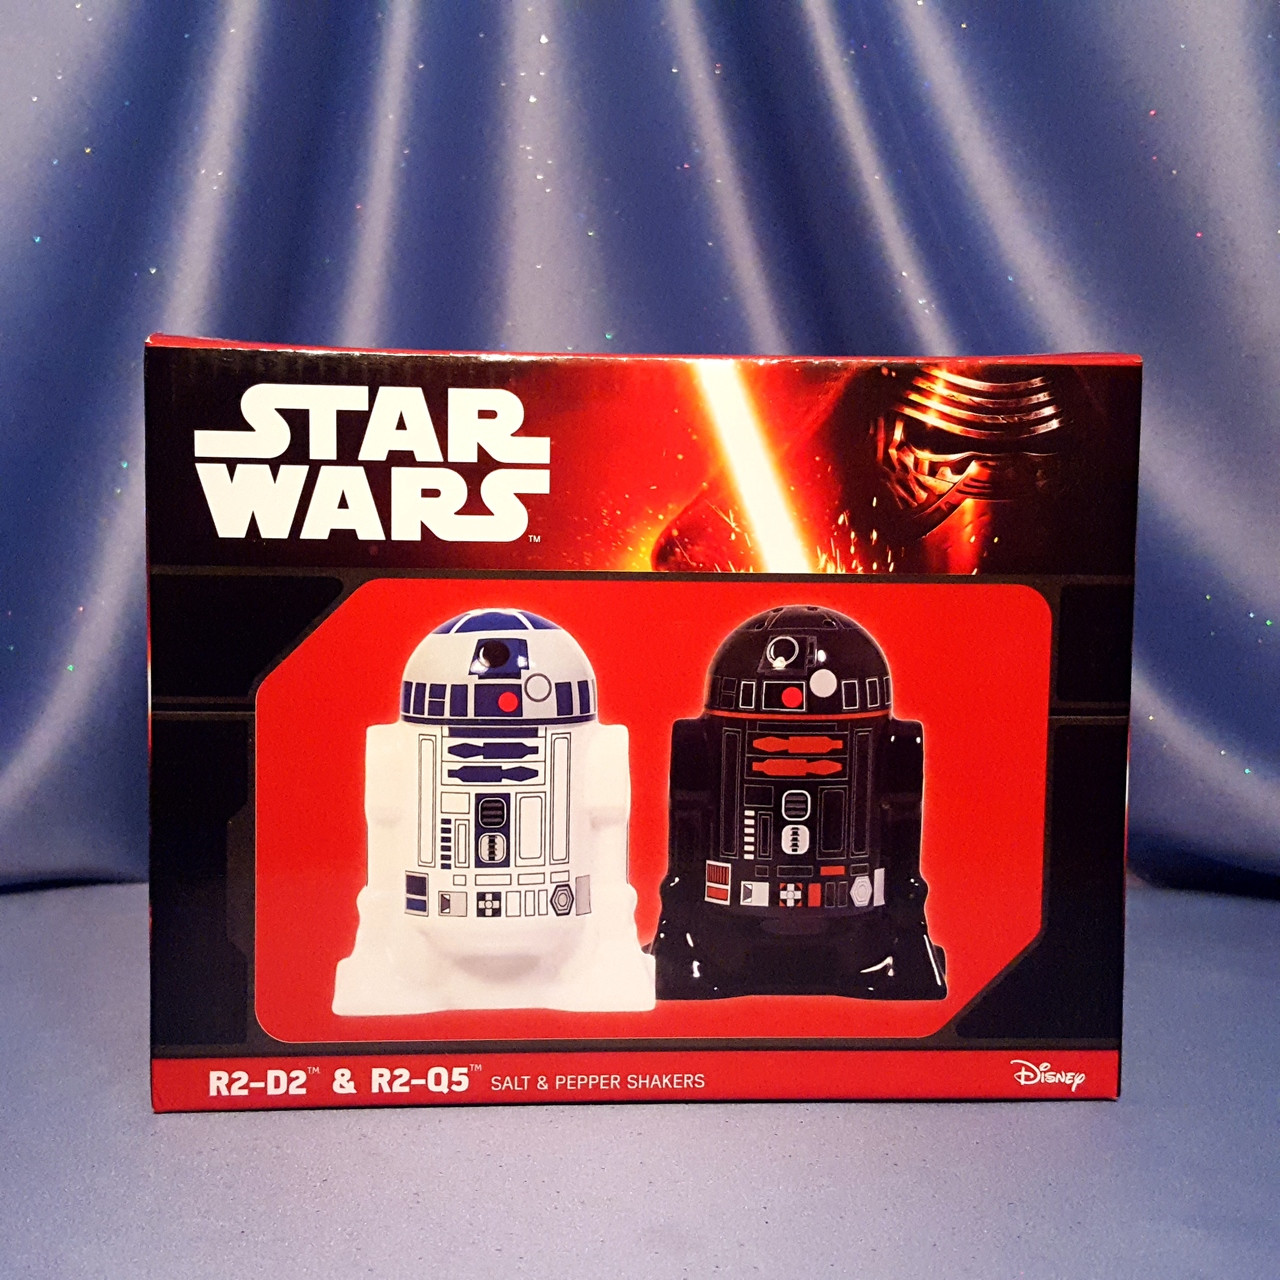 Star Wars R2-D2 and C-3PO Salt Pepper Shakers 